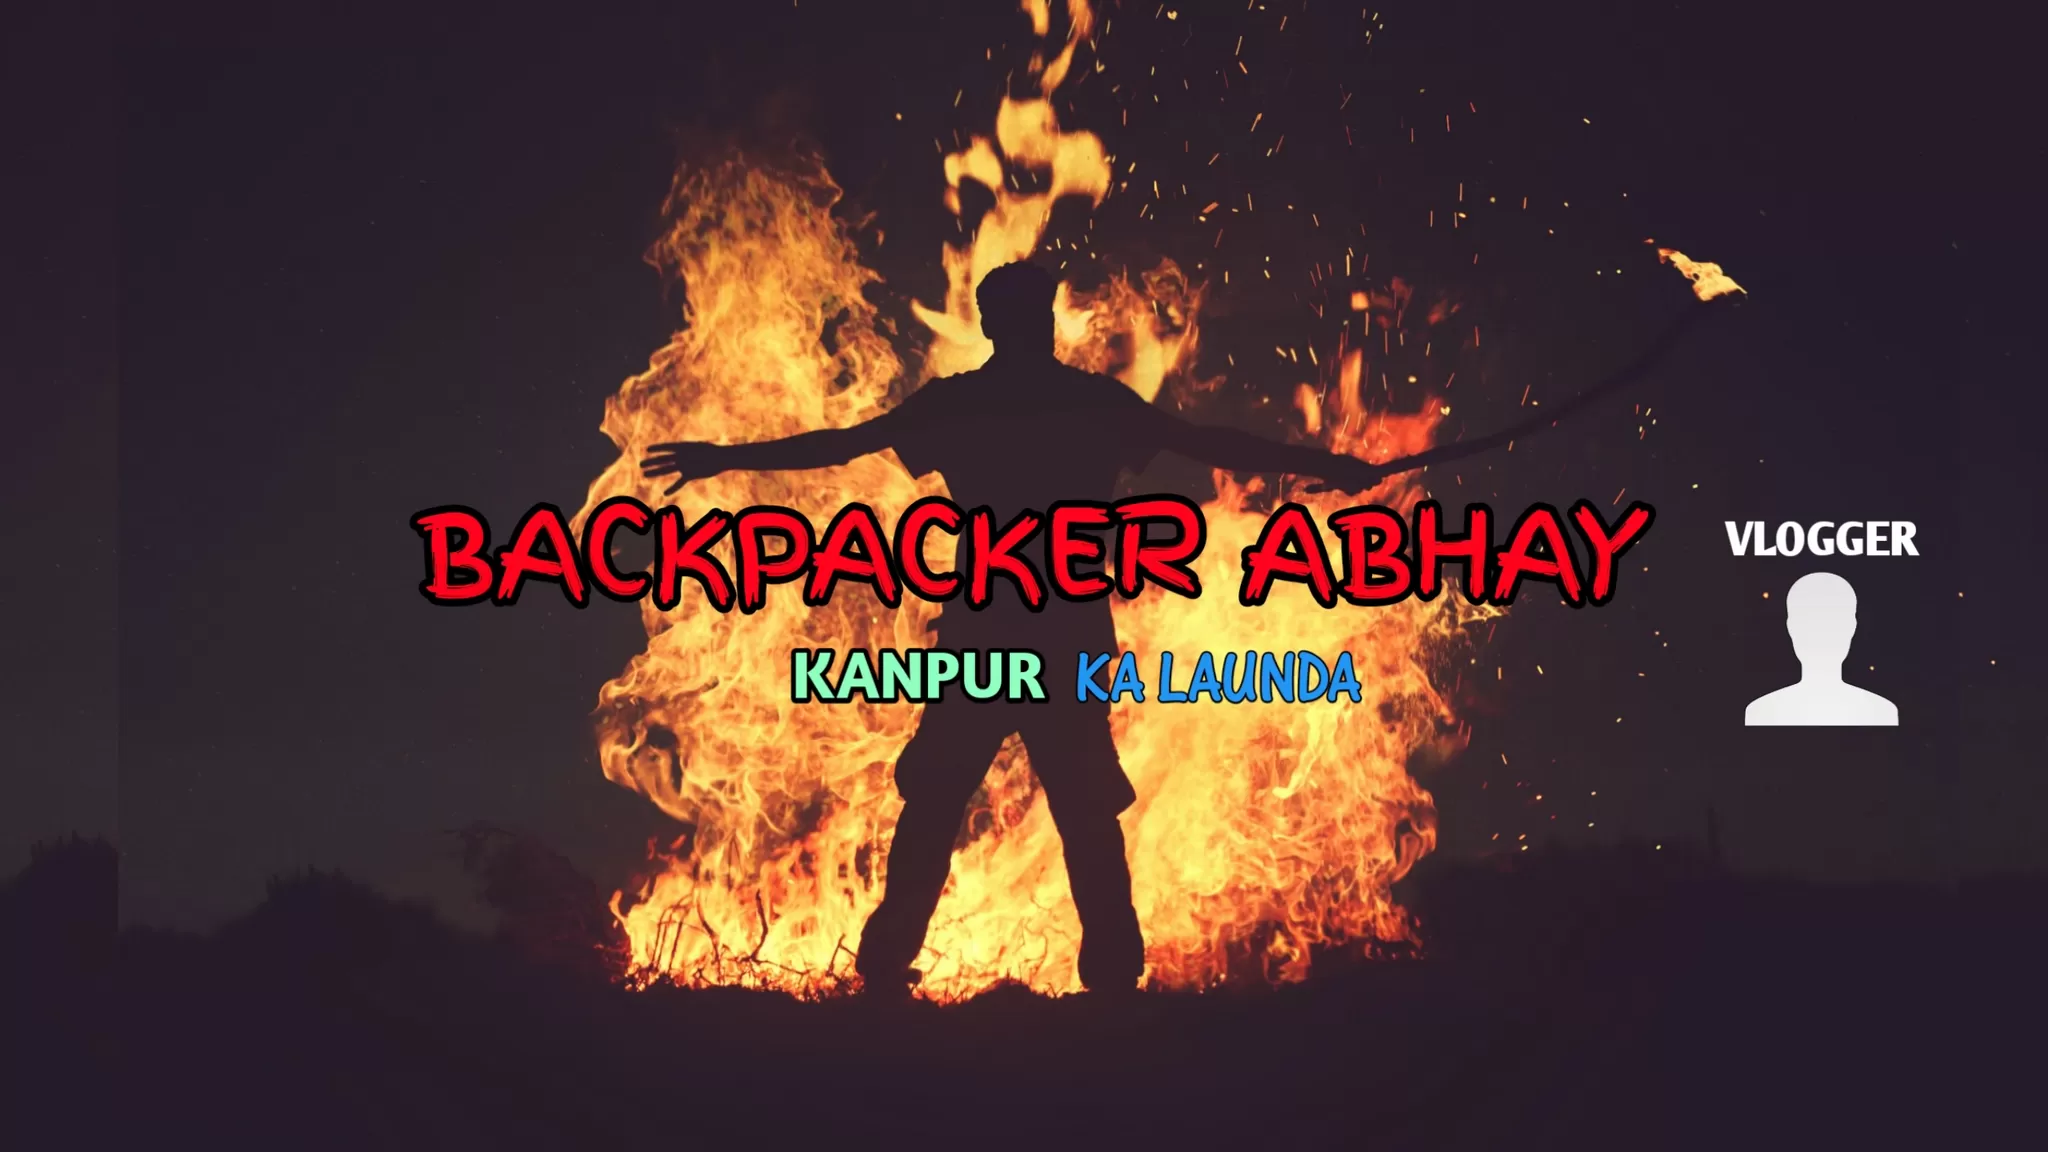 Cover Image of Backpacker Abhay